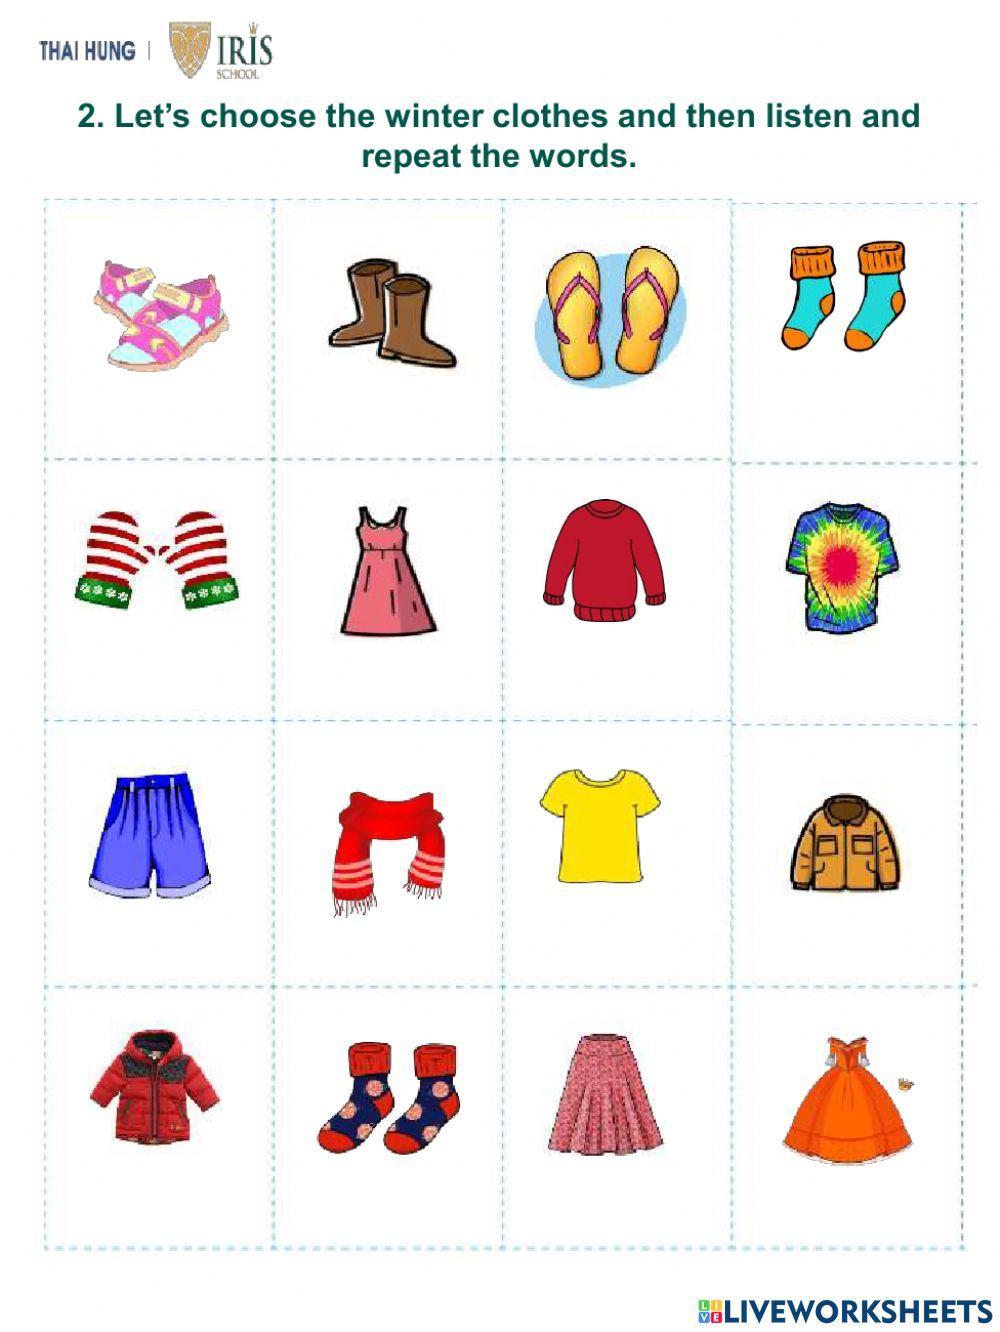 Sunny-Worksheet about Winter Clothes